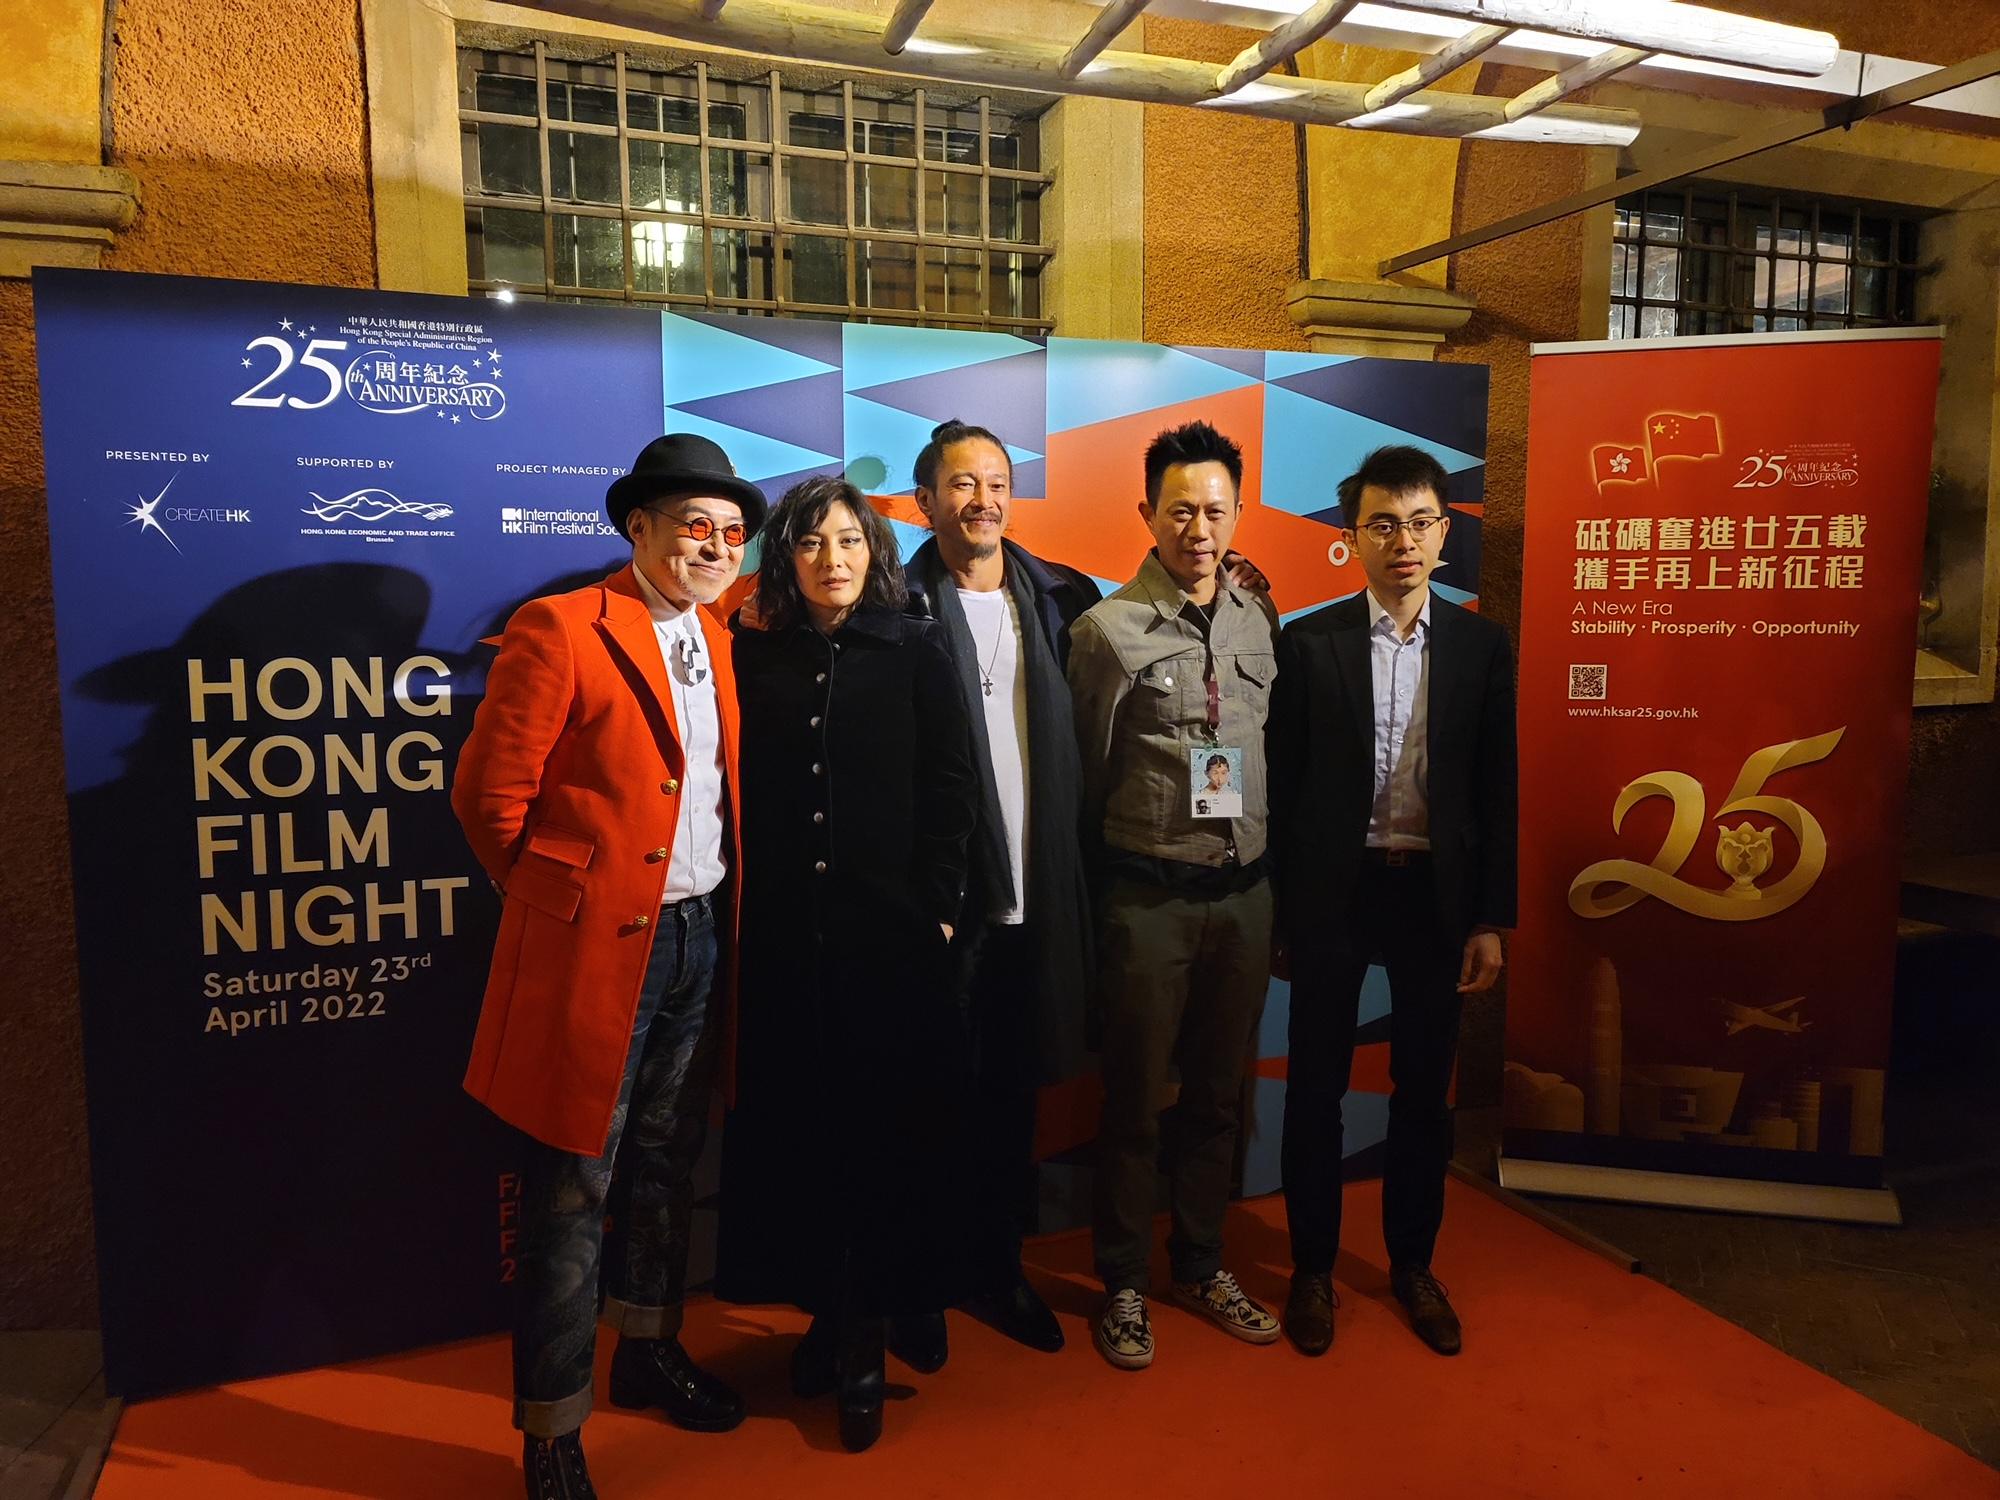 Deputy Representative of the Hong Kong Economic and Trade Office in Brussels, Mr Henry Tsoi (first right) joined a photo call at the Hong Kong Film Night of the 24th Far East Film Festival (FEFF) held on April 23 (Udine time) in Udine, Italy, with the crew of "Finding Bliss: Fire & Ice" Director's Cut, which is one of the 13 Hong Kong films screened by FEFF.

